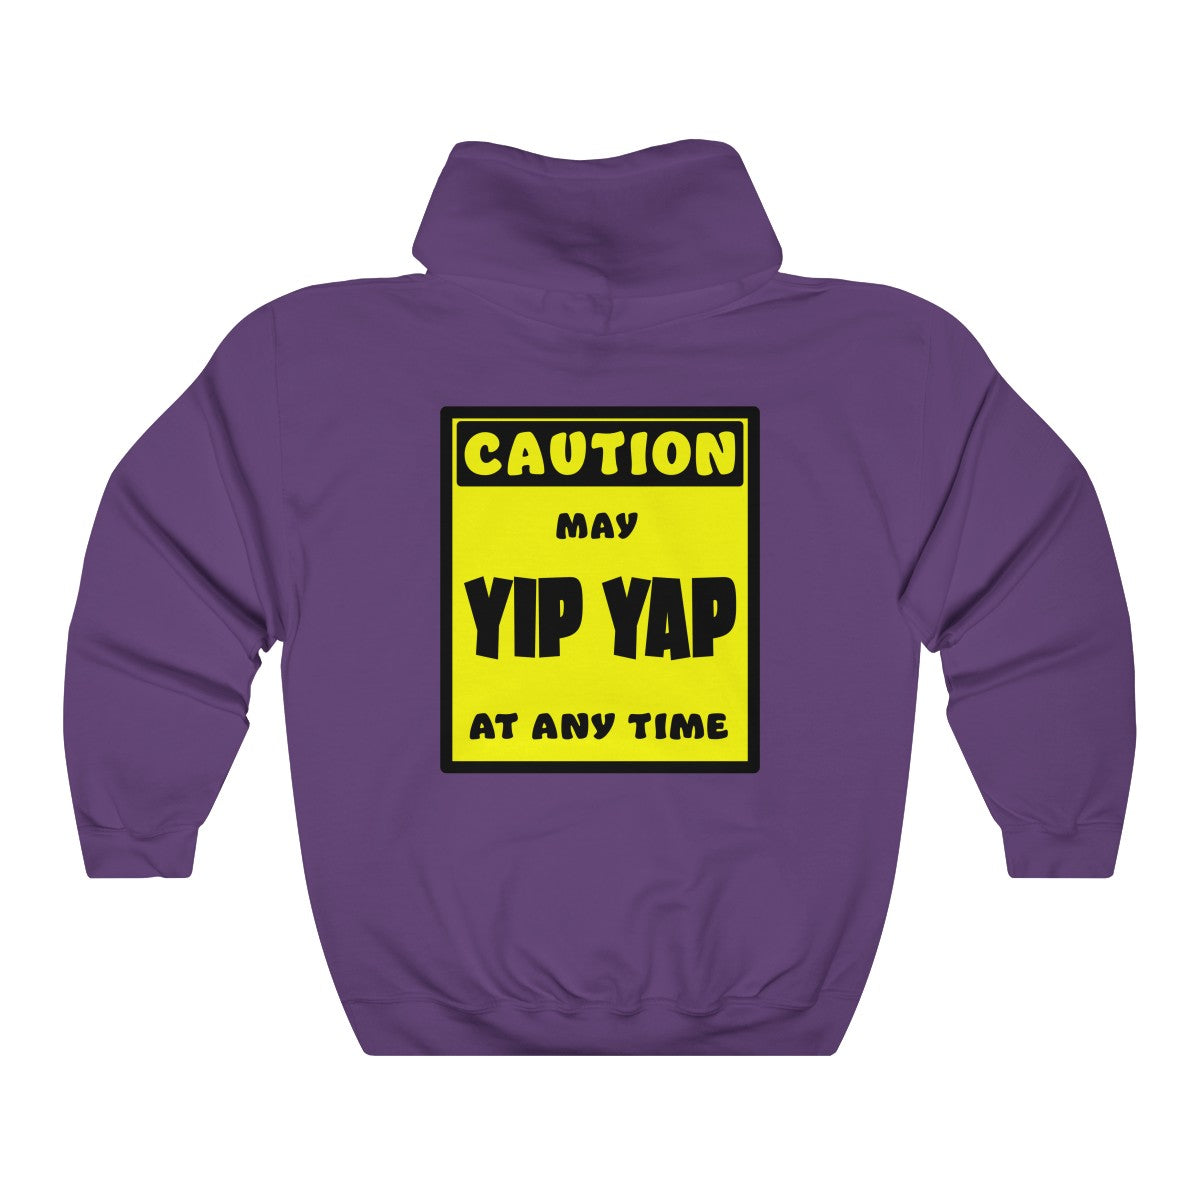 CAUTION! May Yip Yap at any time! - Hoodie Hoodie AFLT-Whootorca Purple S 